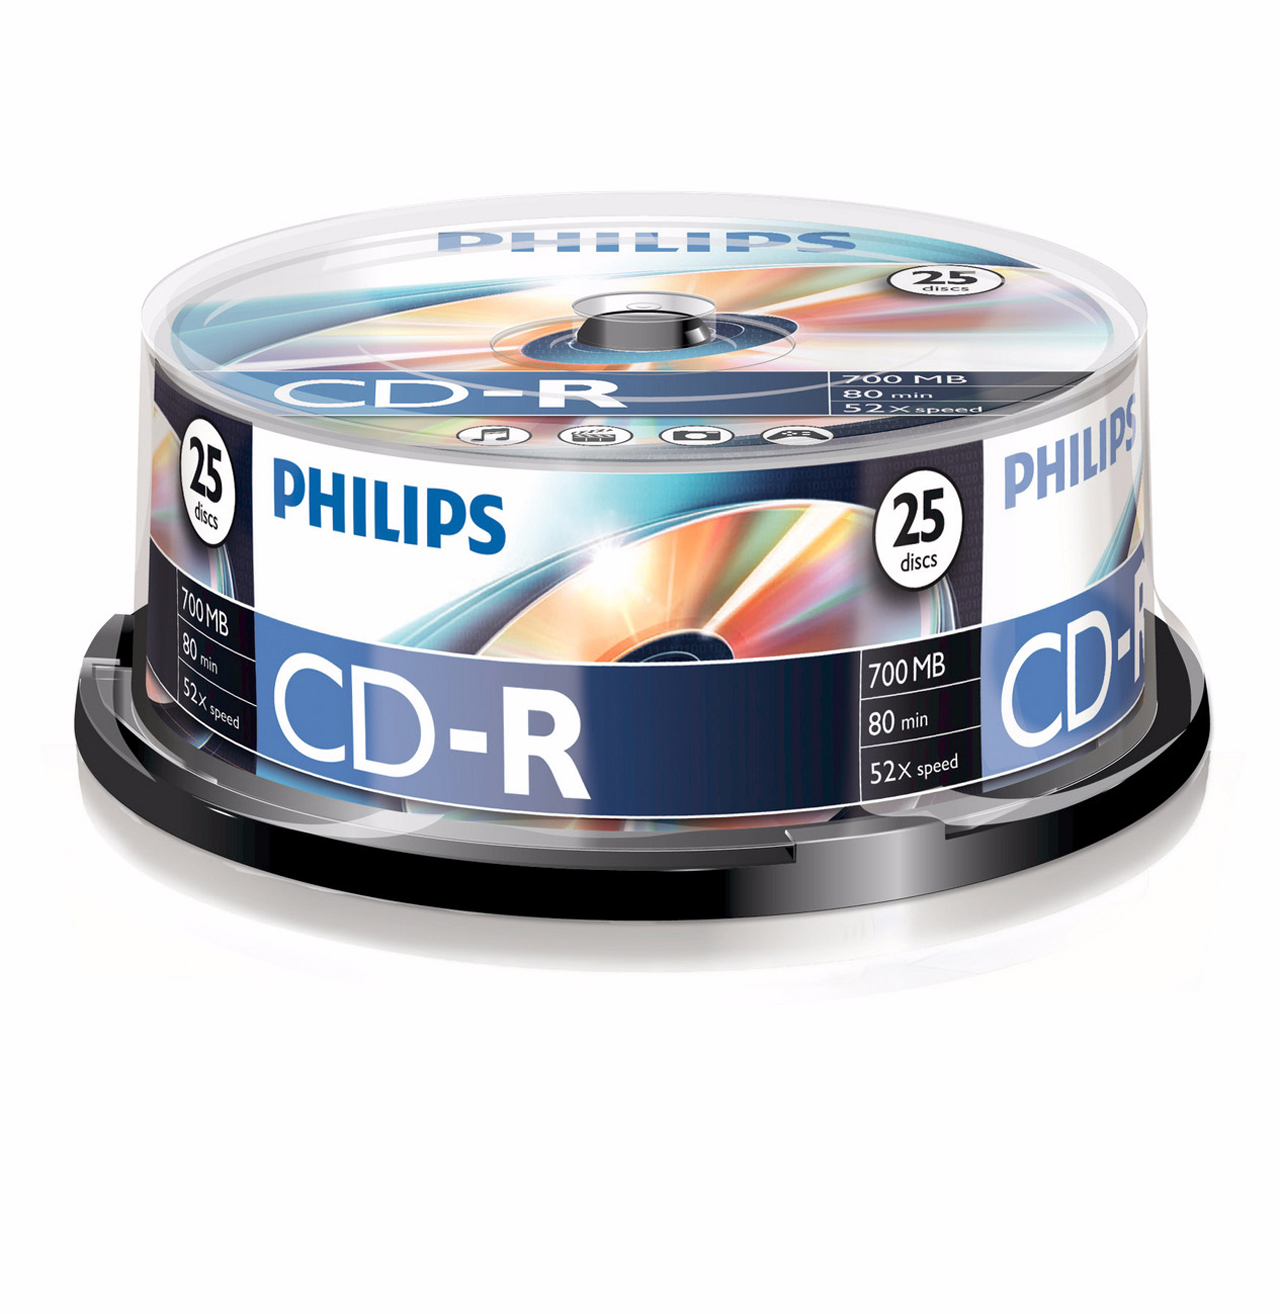 PHILIPS CD-R Spindle 80 Min./700MB 4632 25 Pcs